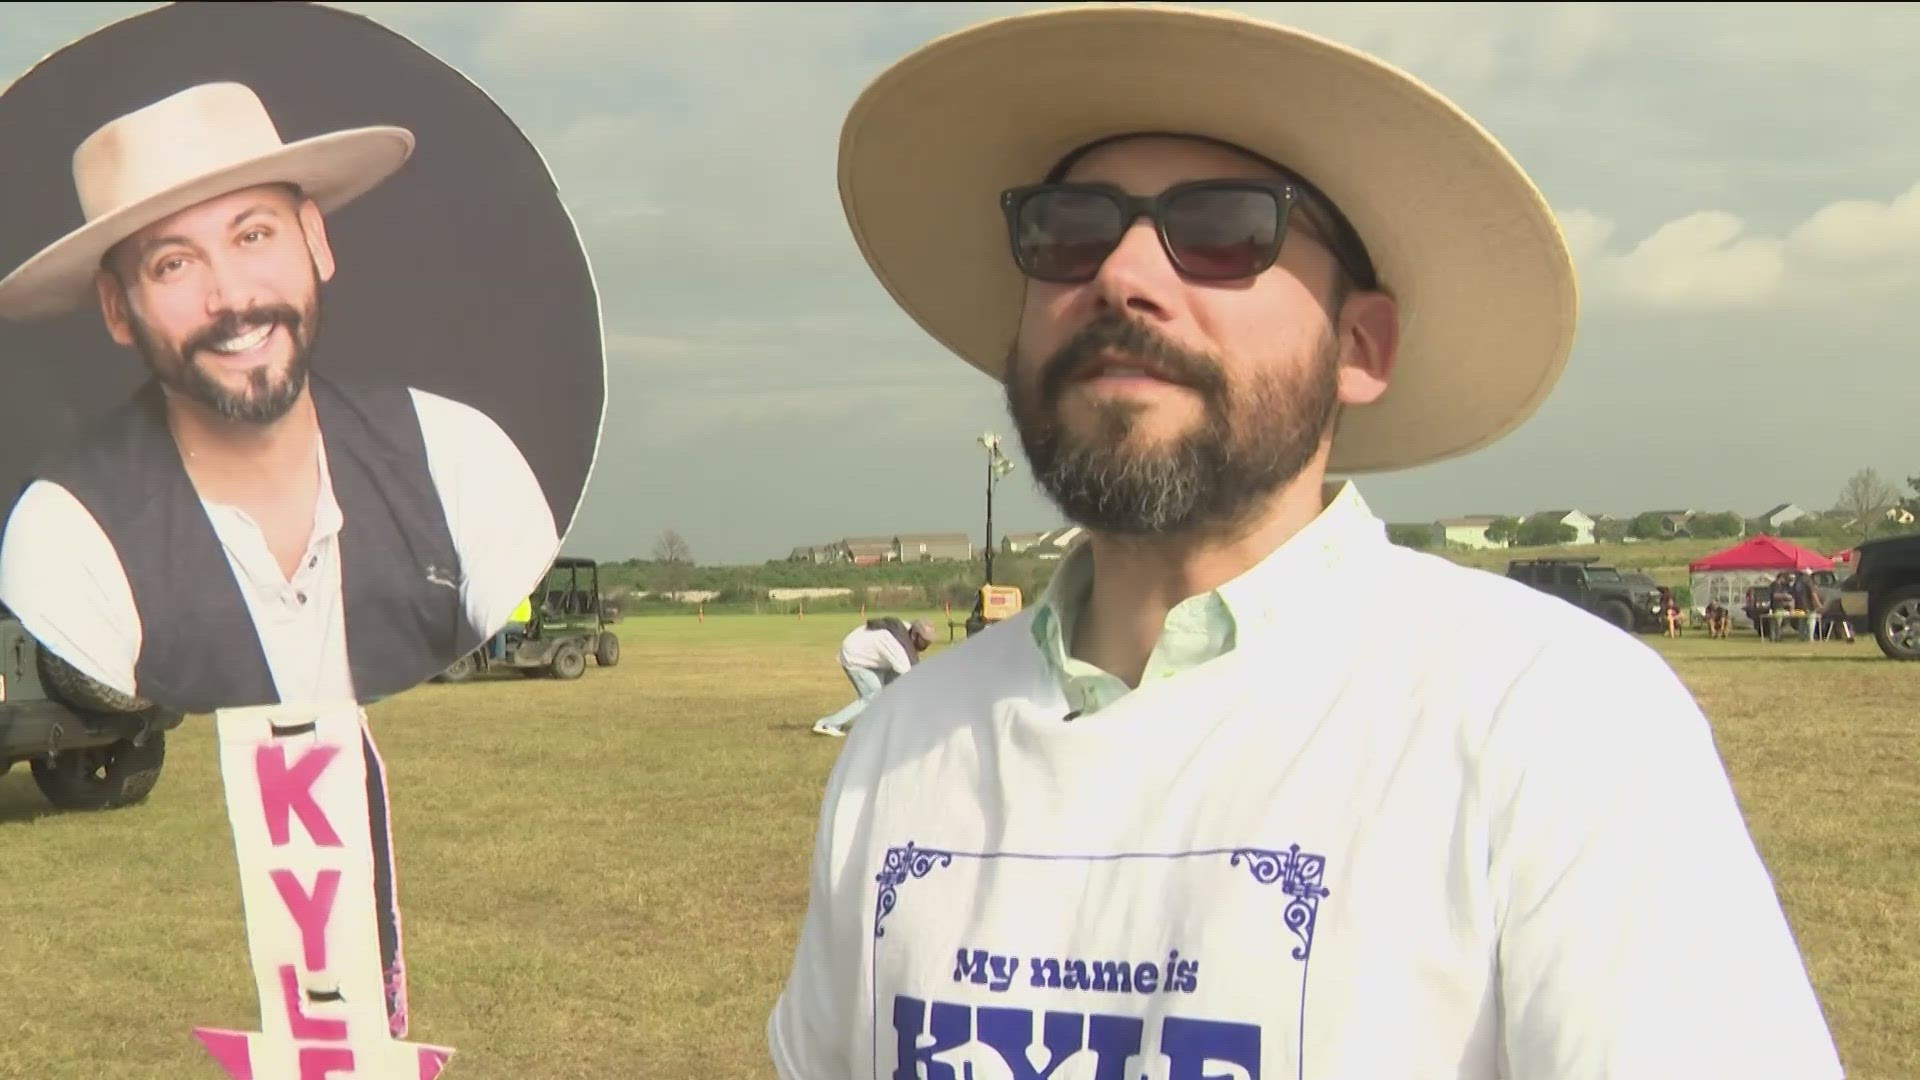 The City of Kyle attempted to set a record for the largest same first name gathering on Sunday afternoon. KVUE spoke with several Kyles about the event.